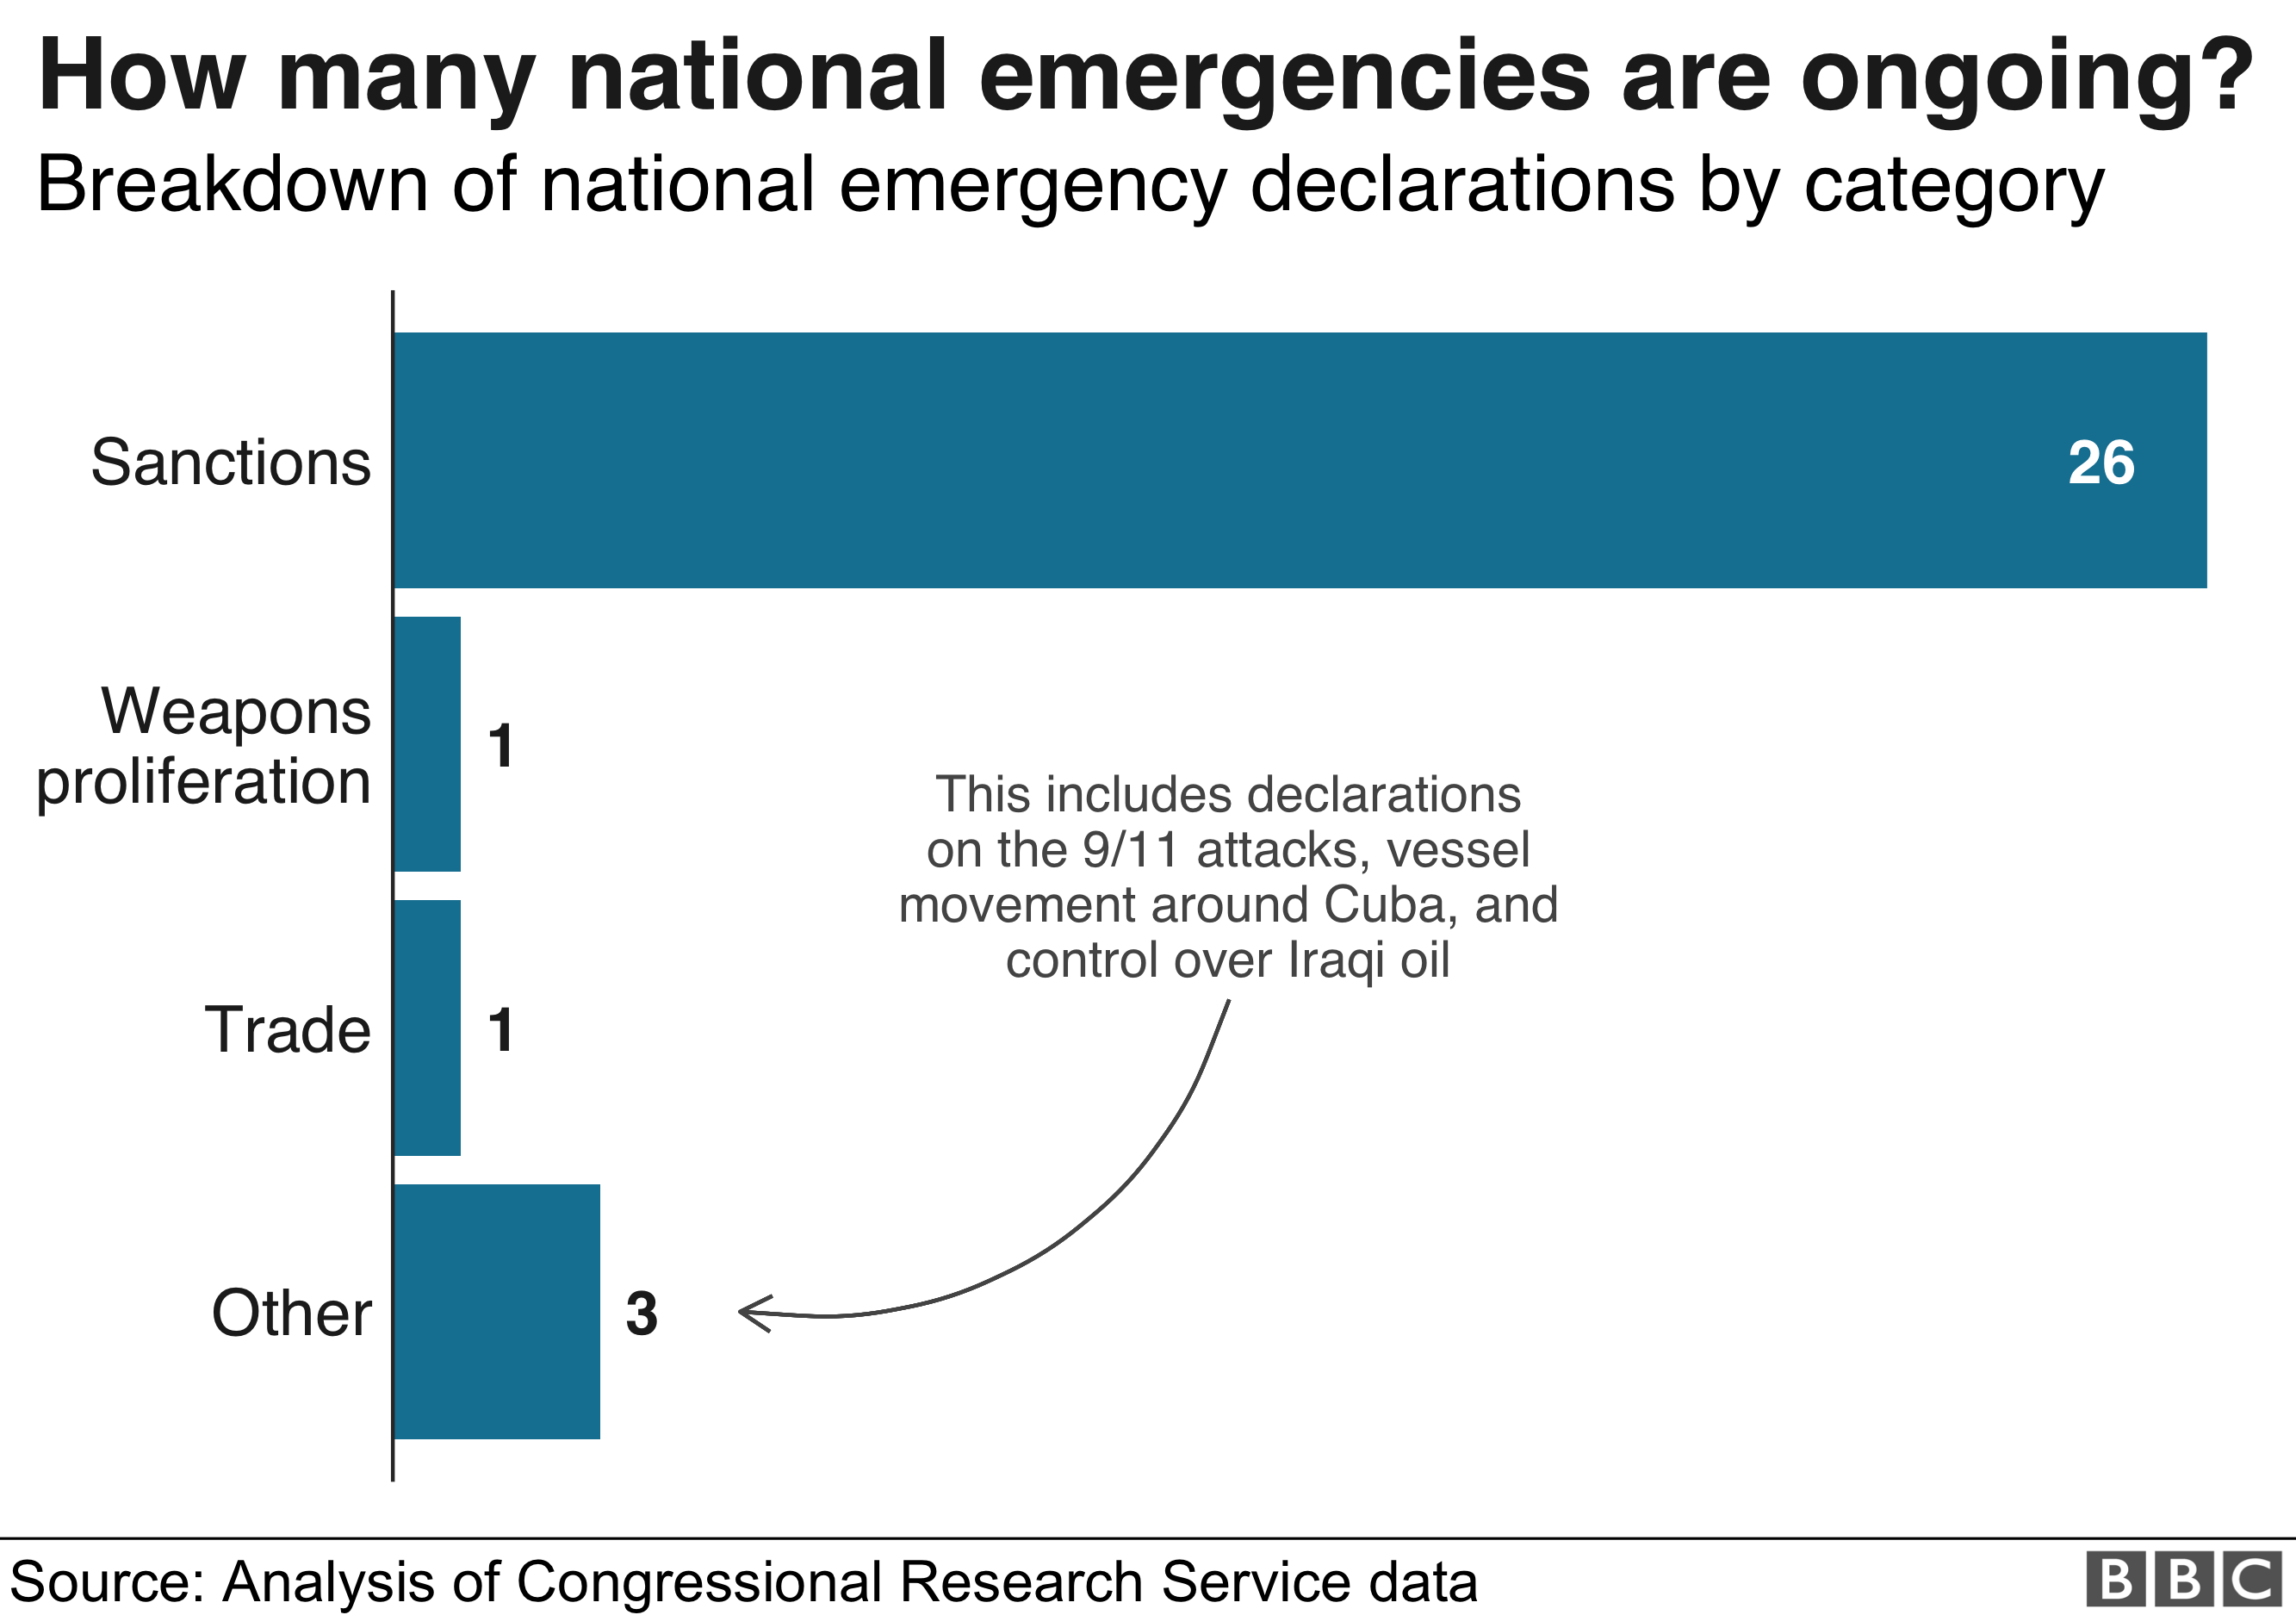 Chart: There are 31 ongoing national emergencies